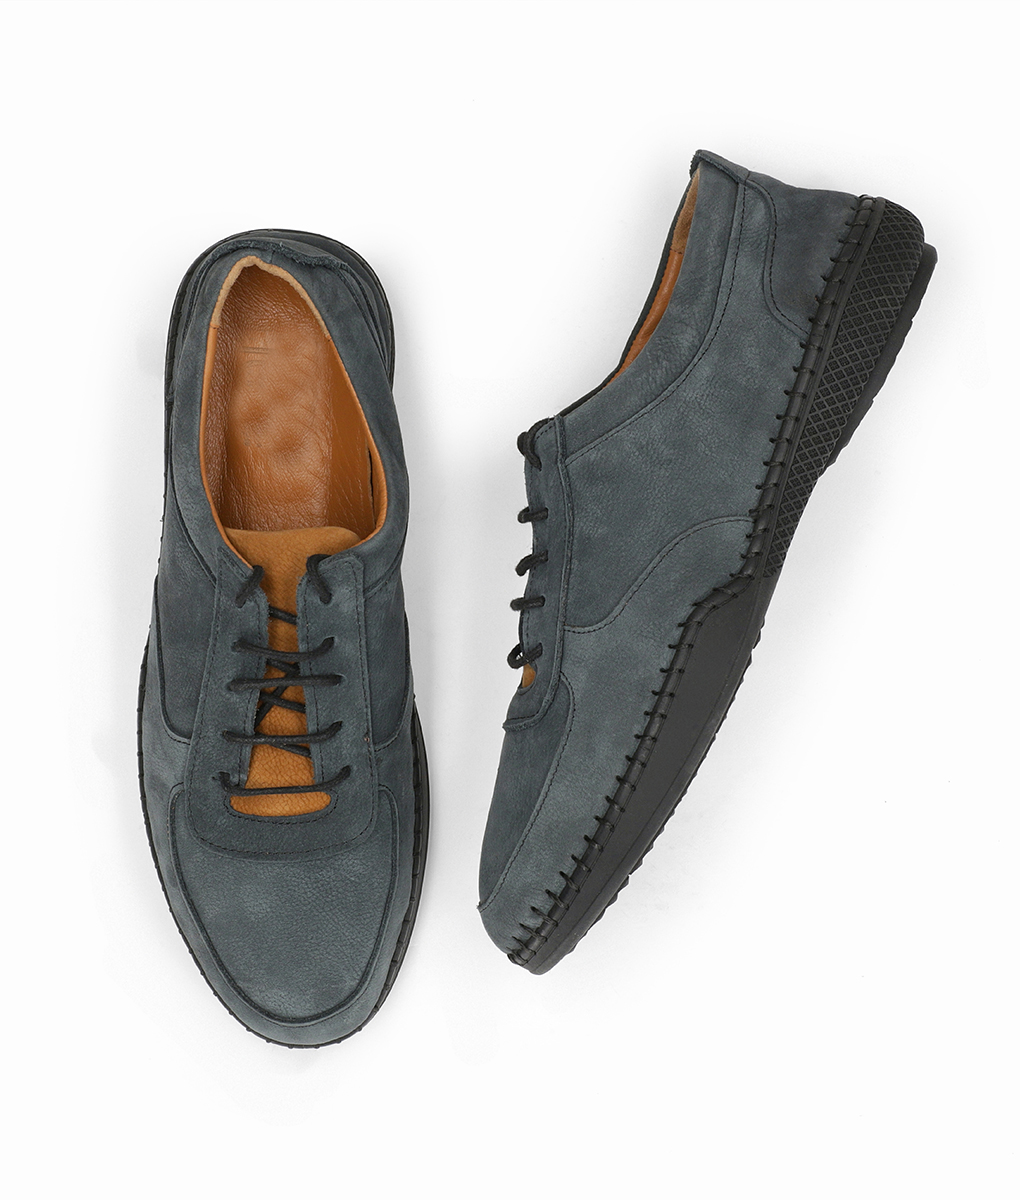 Dual-tone Blue Sporty Suede Leather Shoes for Men